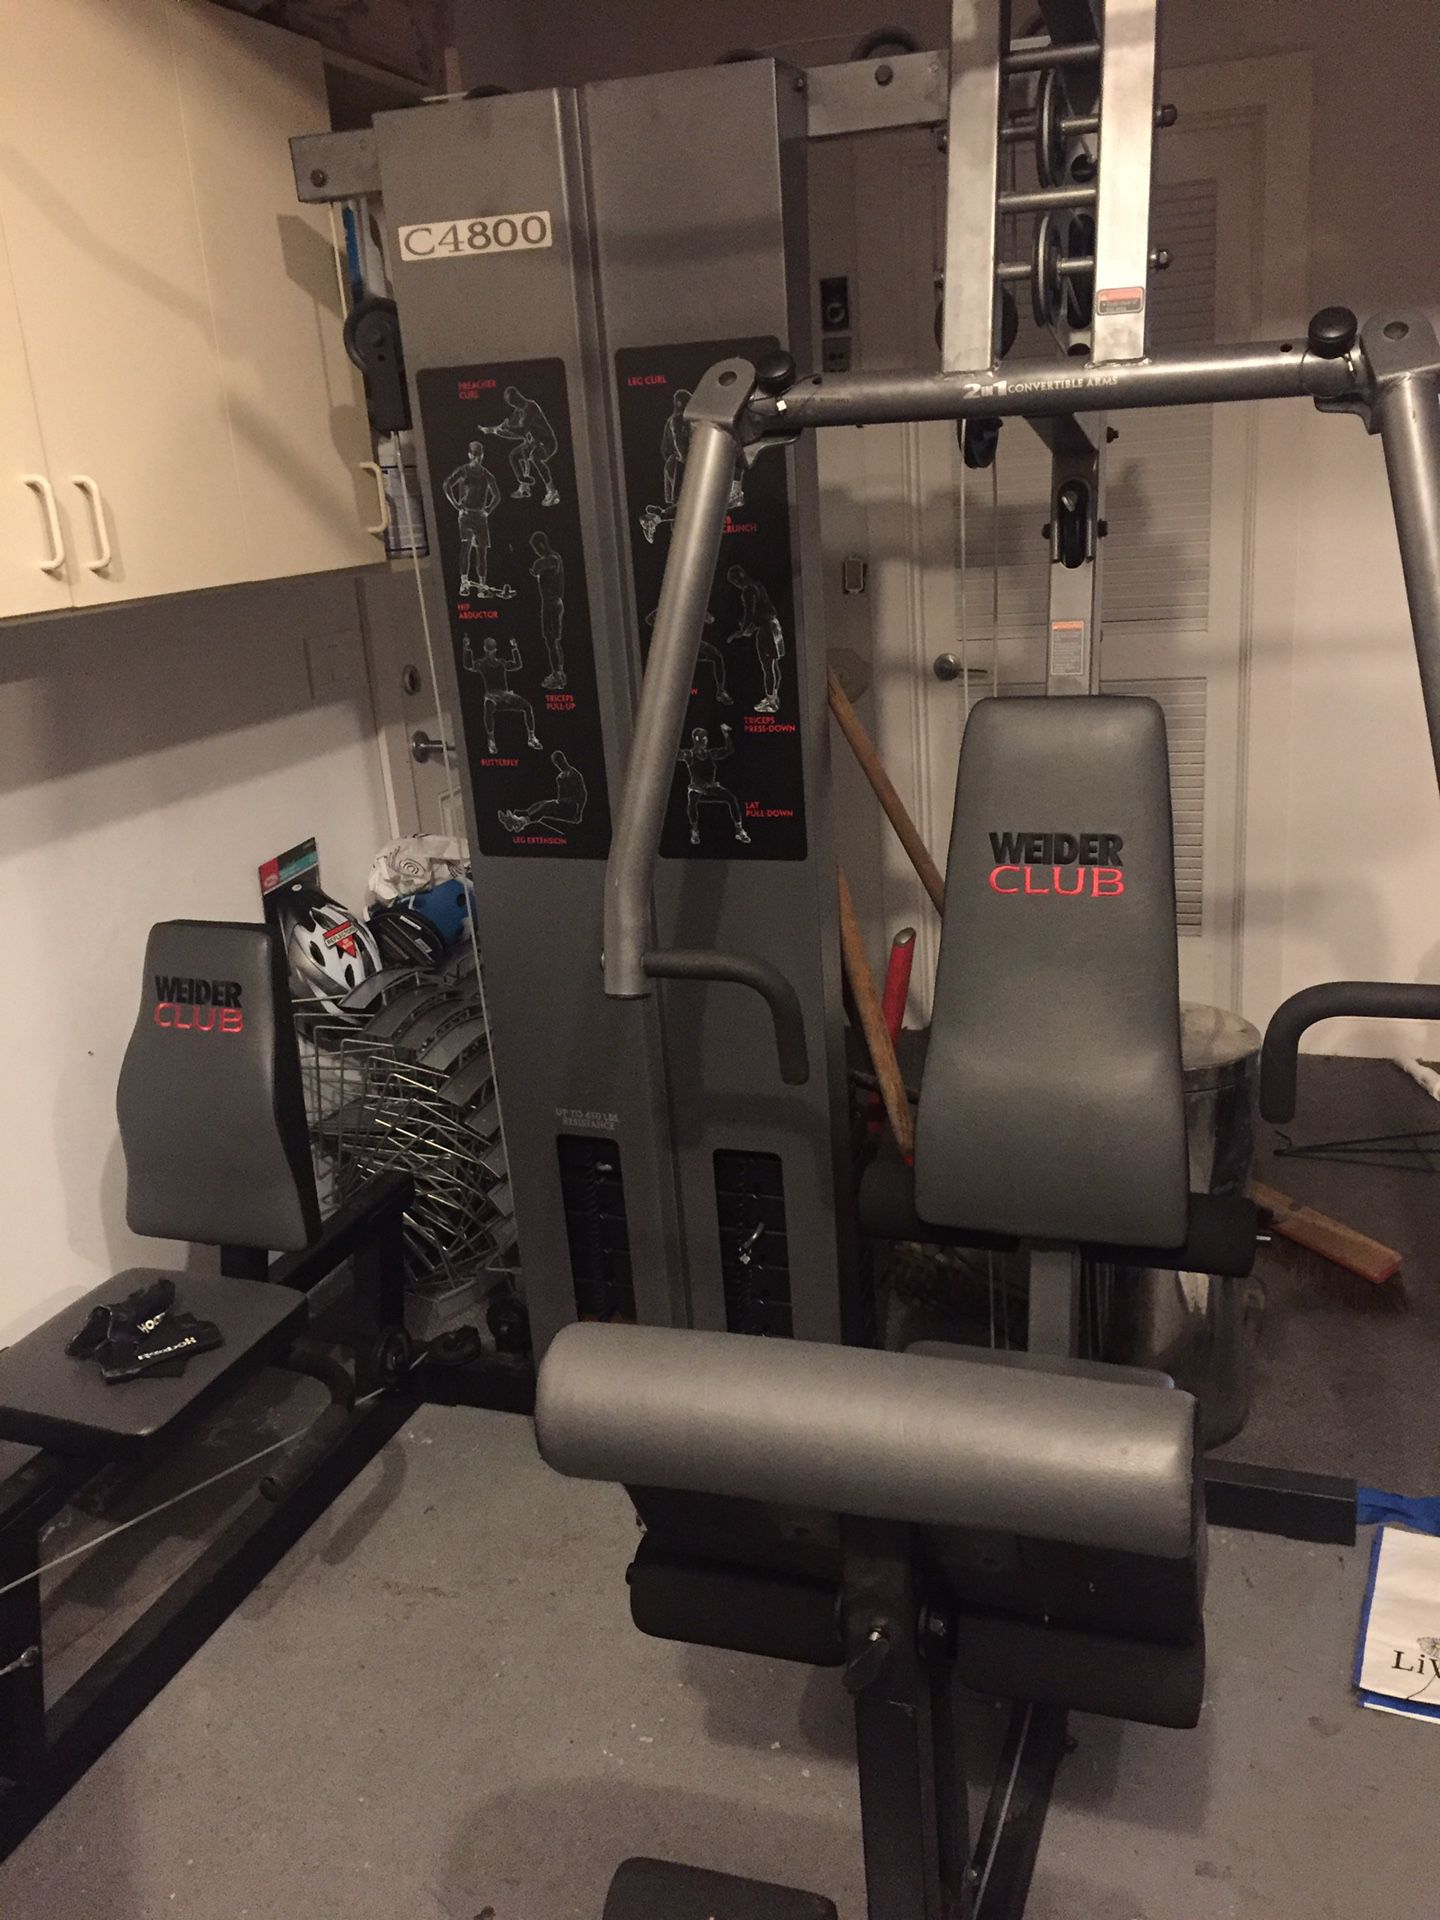 C4800 Gym for Sale in Federal WA - OfferUp